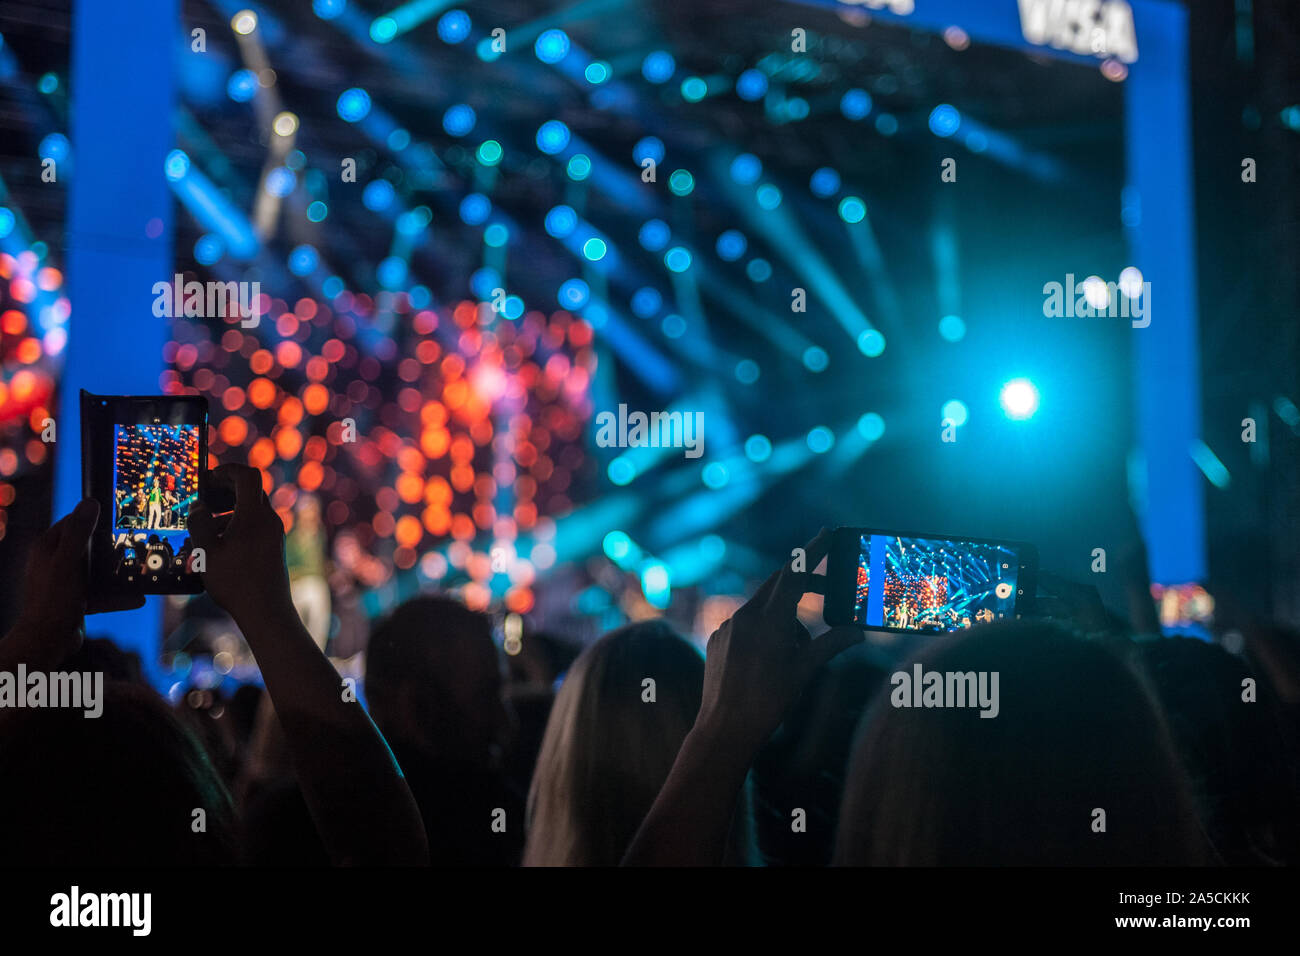 Shapes of people taking photos and videos with a smartphone telephone of a concert during a party, at night, with light and sound effects, typical fro Stock Photo